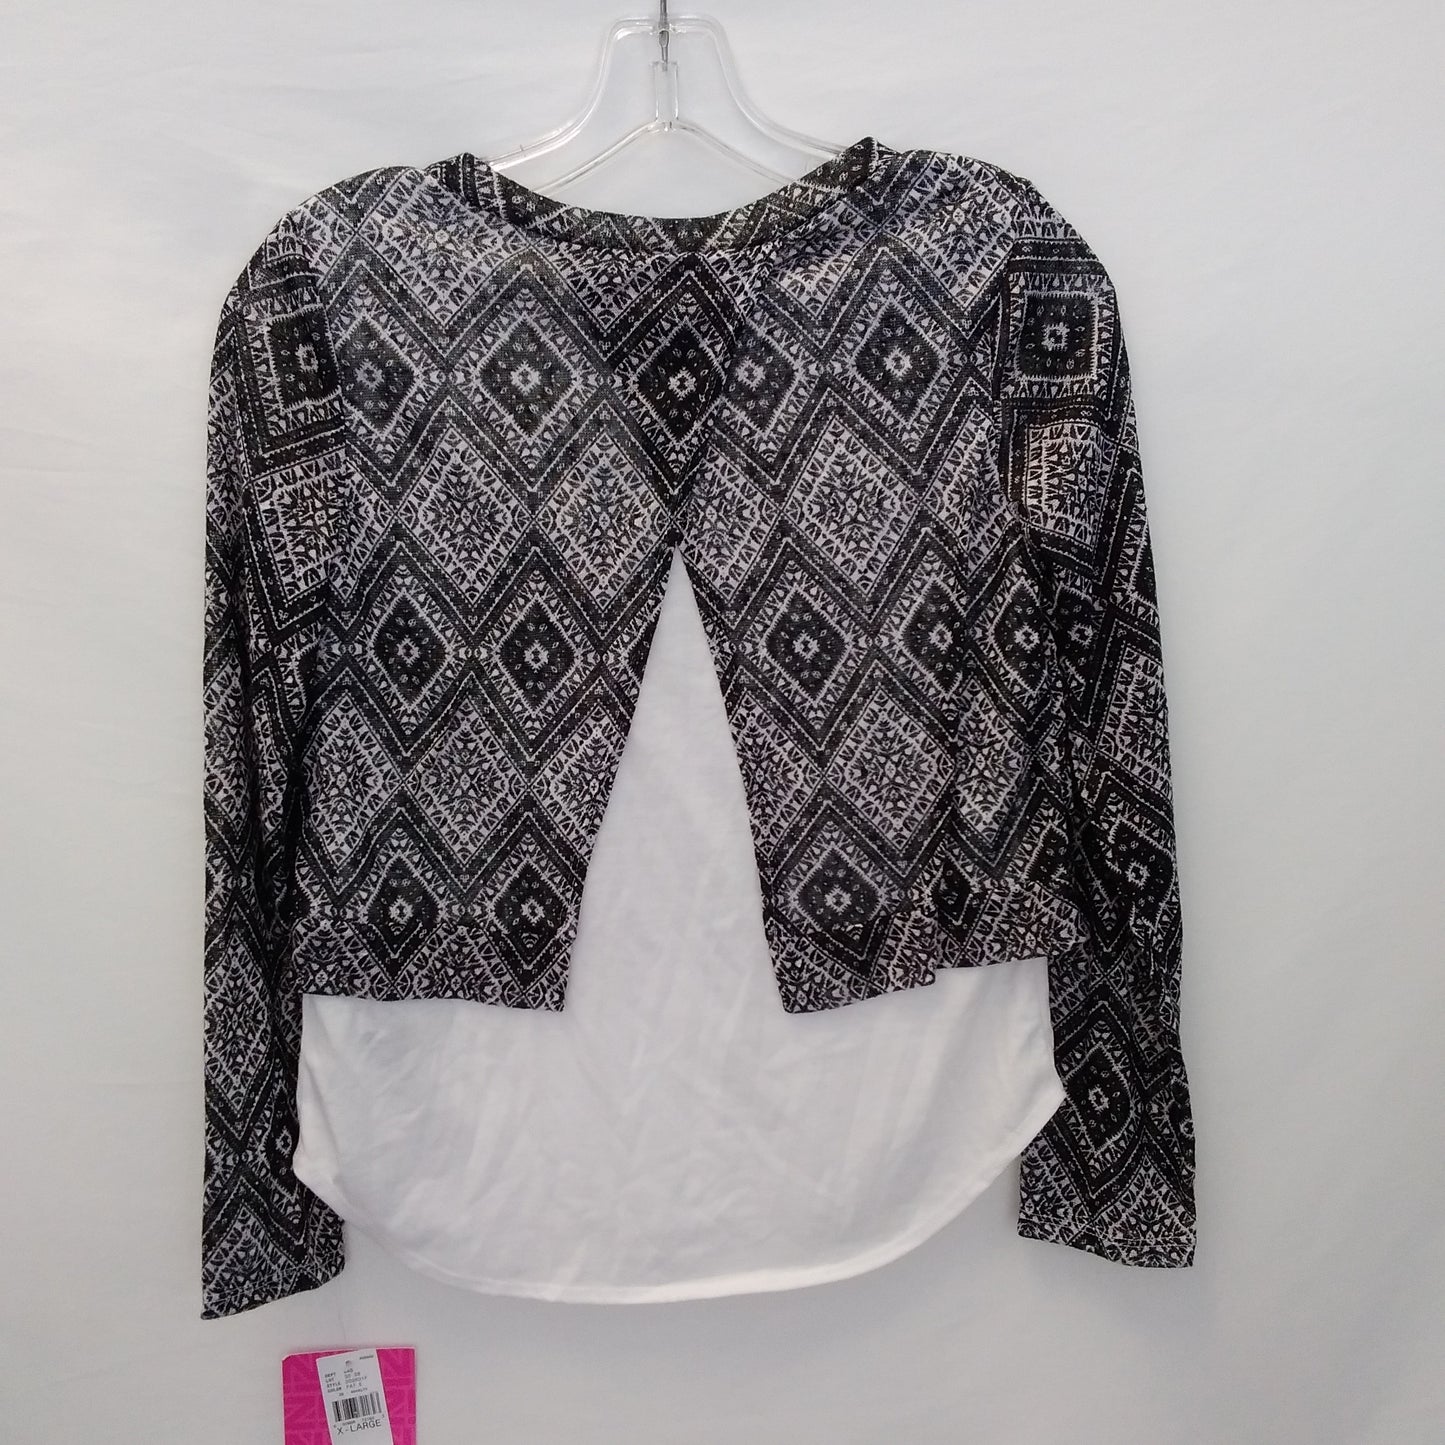 NWT - Girl's IZ Byer Black and White Top with Necklace - XL (16)